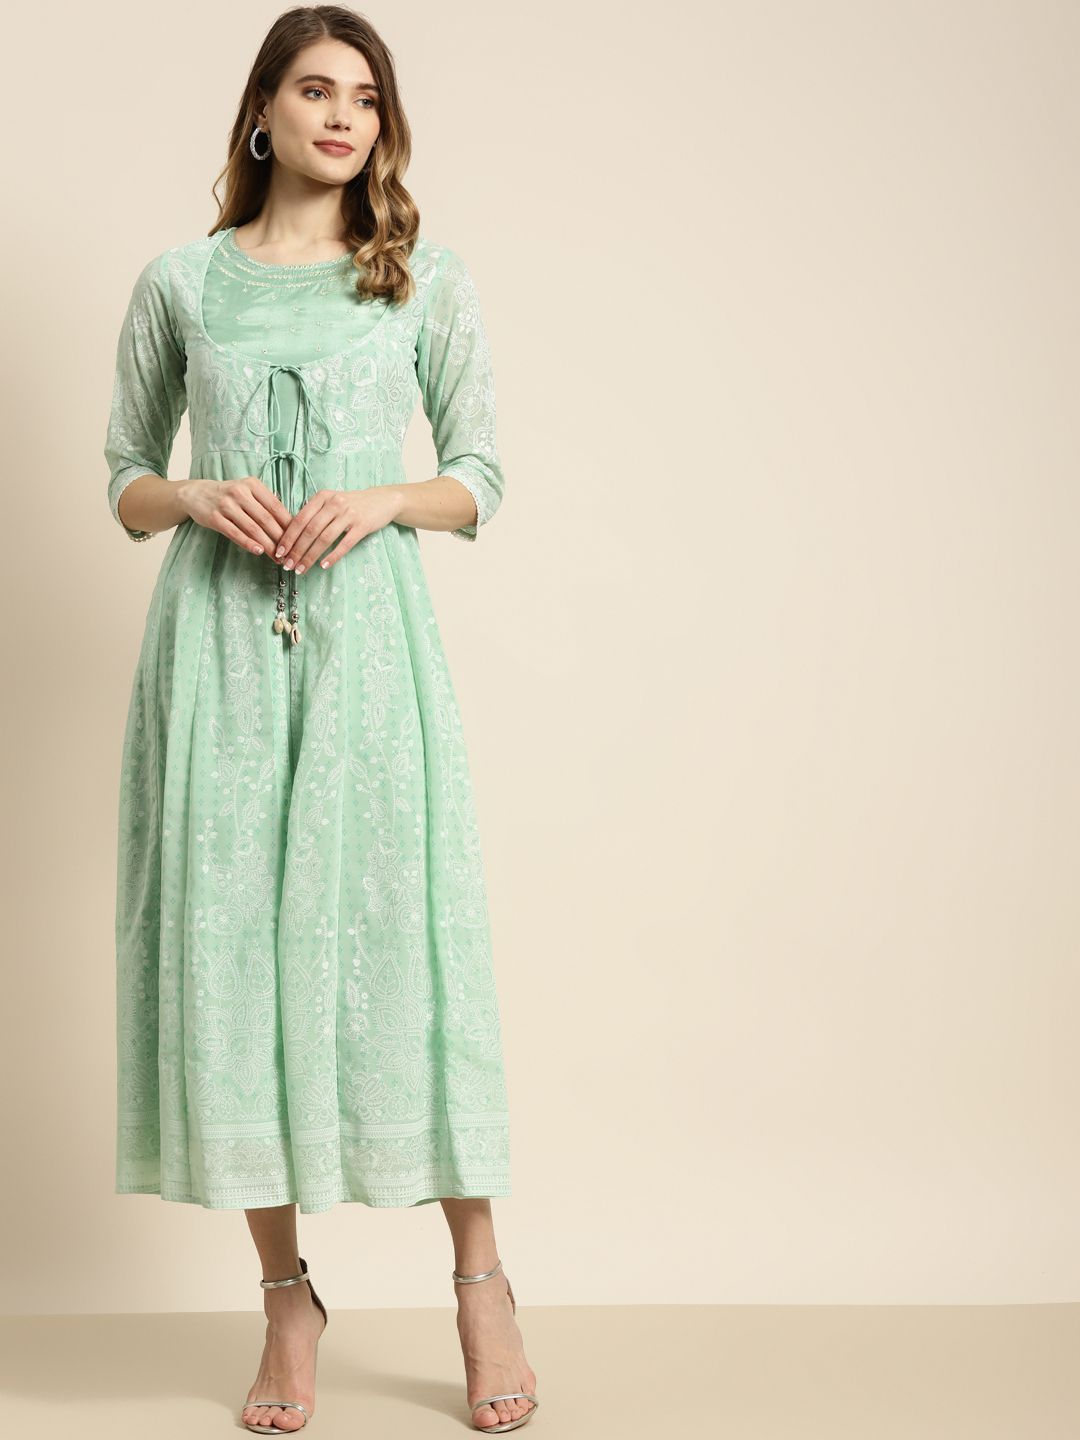 Juniper Mint Green & Silver Yoke Mirror Work A-Line Midi Dress with Ethnic Jacket Price in India